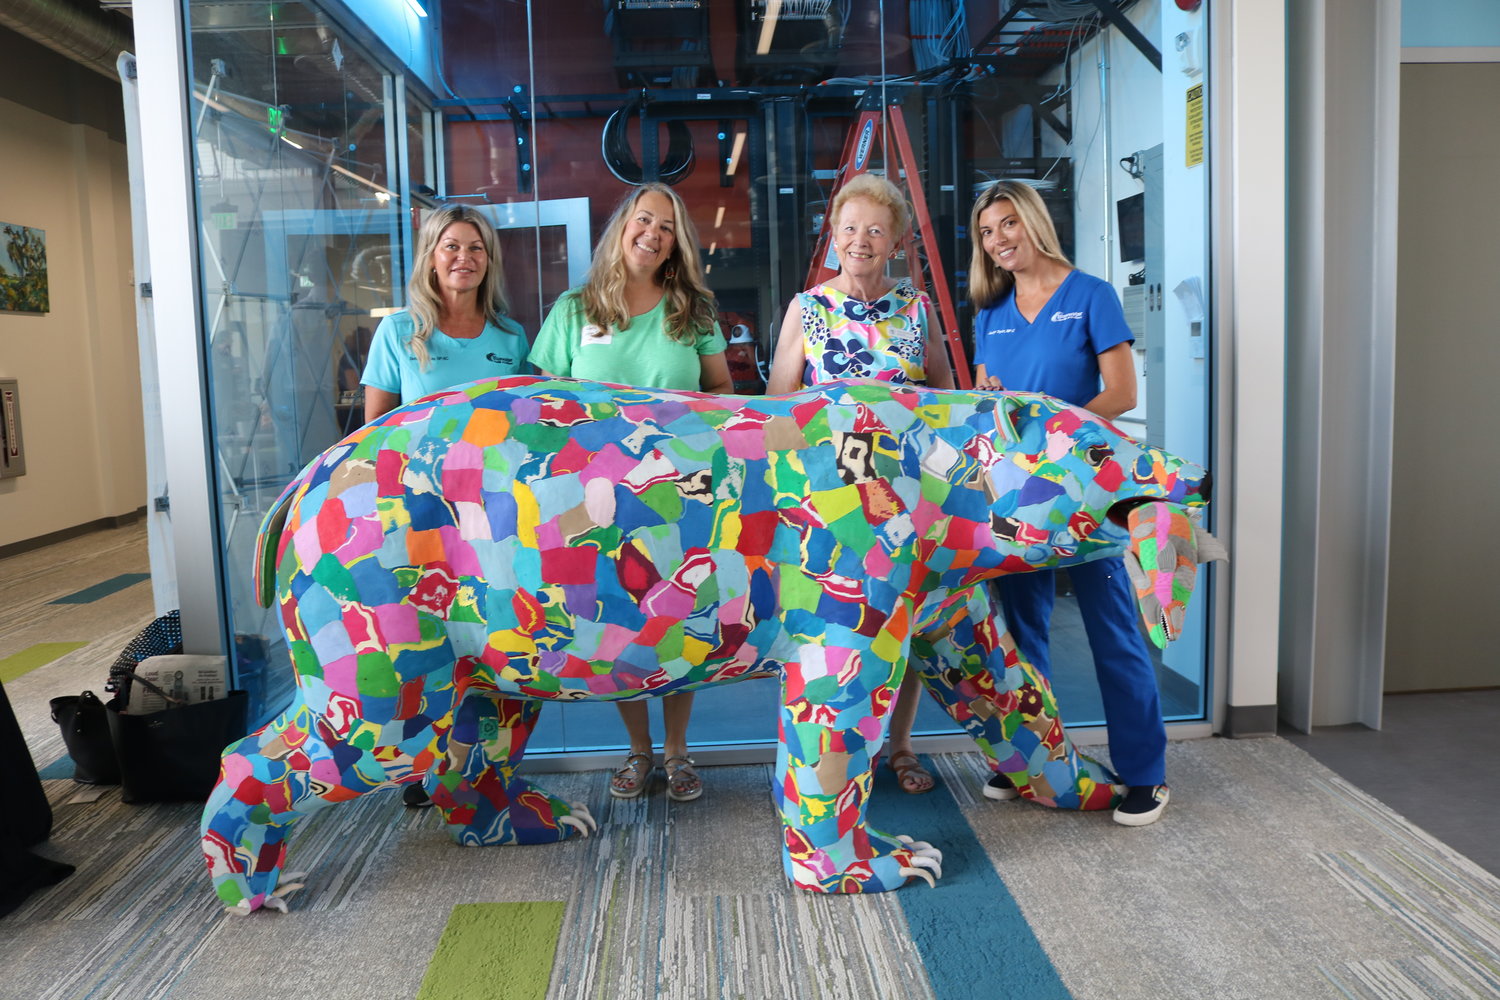 Brittney Schmid, Michelle Smith, Jackie Smith and Jaclyn Taylor stand behind a sculpture of a grizzly made by Ocean Sole entirely of discarded flip-flops. The sculpture is one of several at the link.